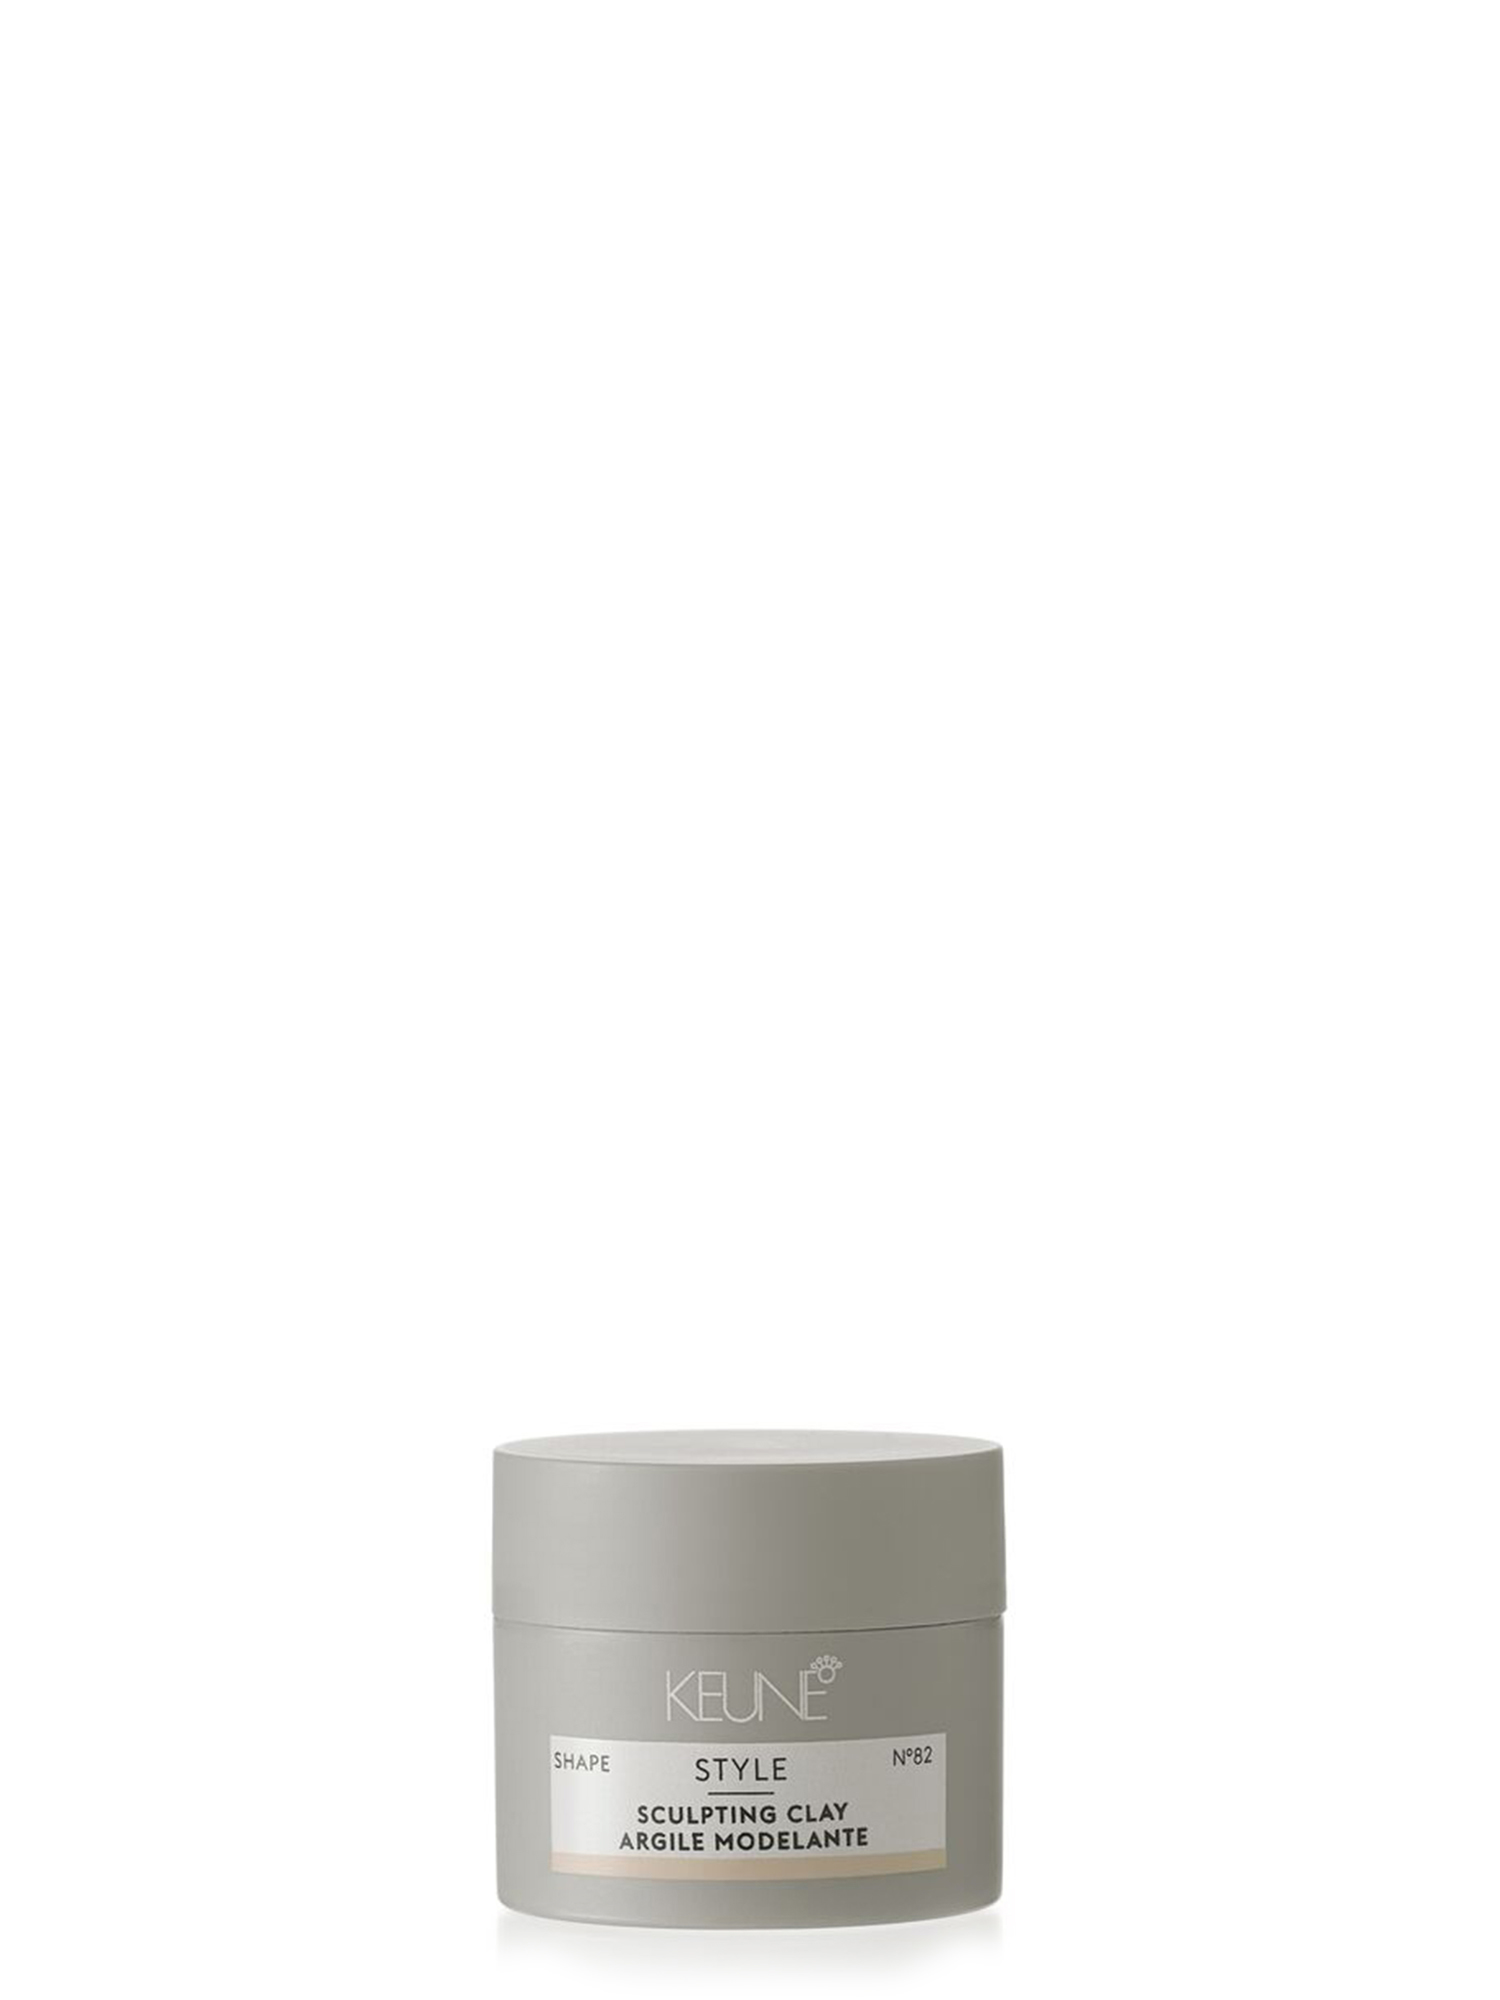 Try our N° 82 Sculpting Clay for Effortless Haarstyling and a Stunning Mattes Finish on keune.ch. Perfect for hairstyles for short hair.